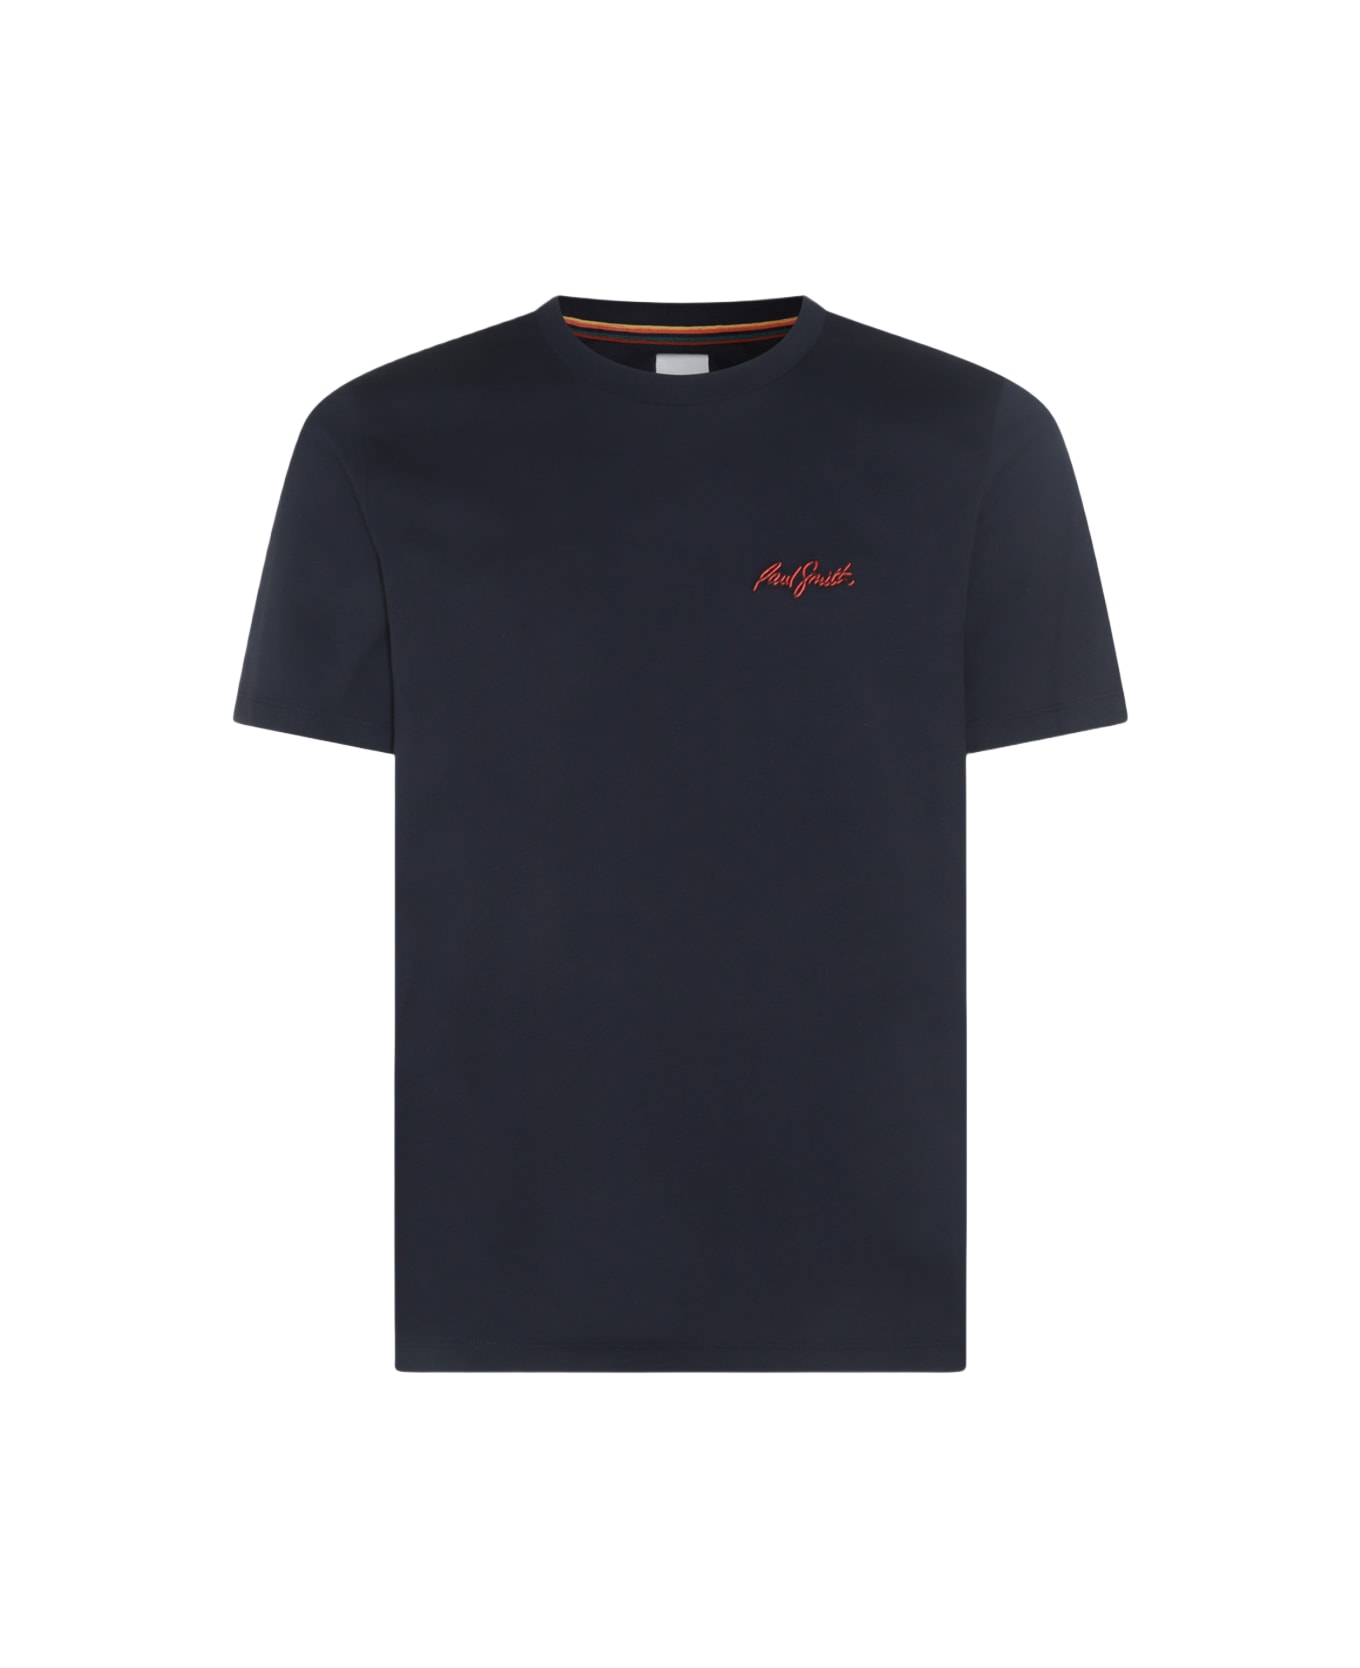 Paul Smith Navy Blue And Red Cotton T-shirt - Blue シャツ